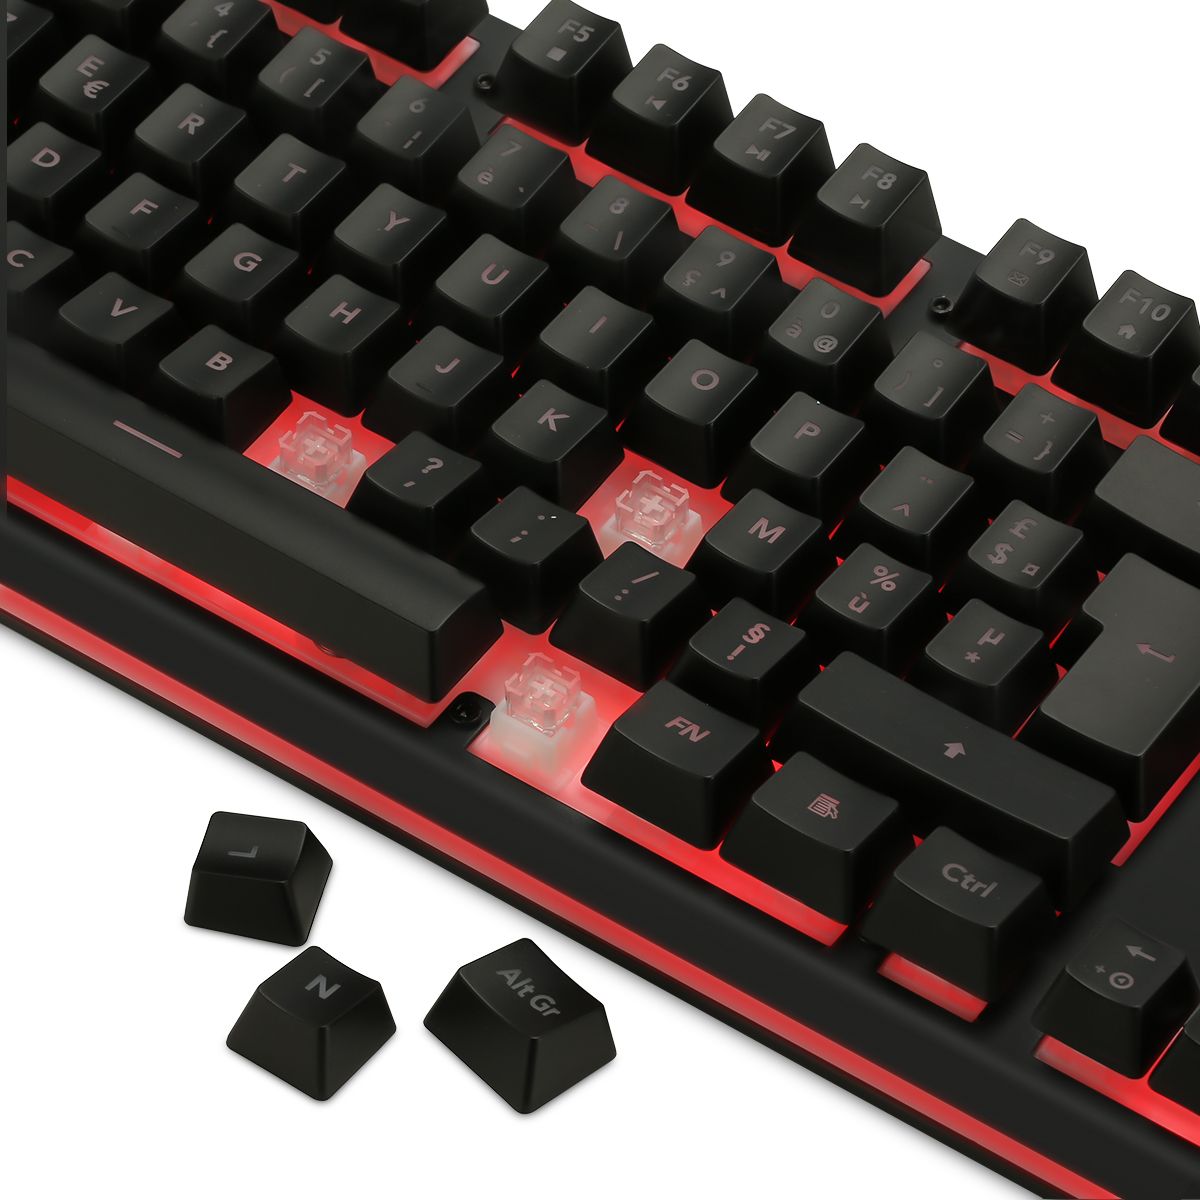 Meco-104Keys-RGB-LED-Effects-French-German-English-Layout-With-Mechanical-Handfeel-1170907